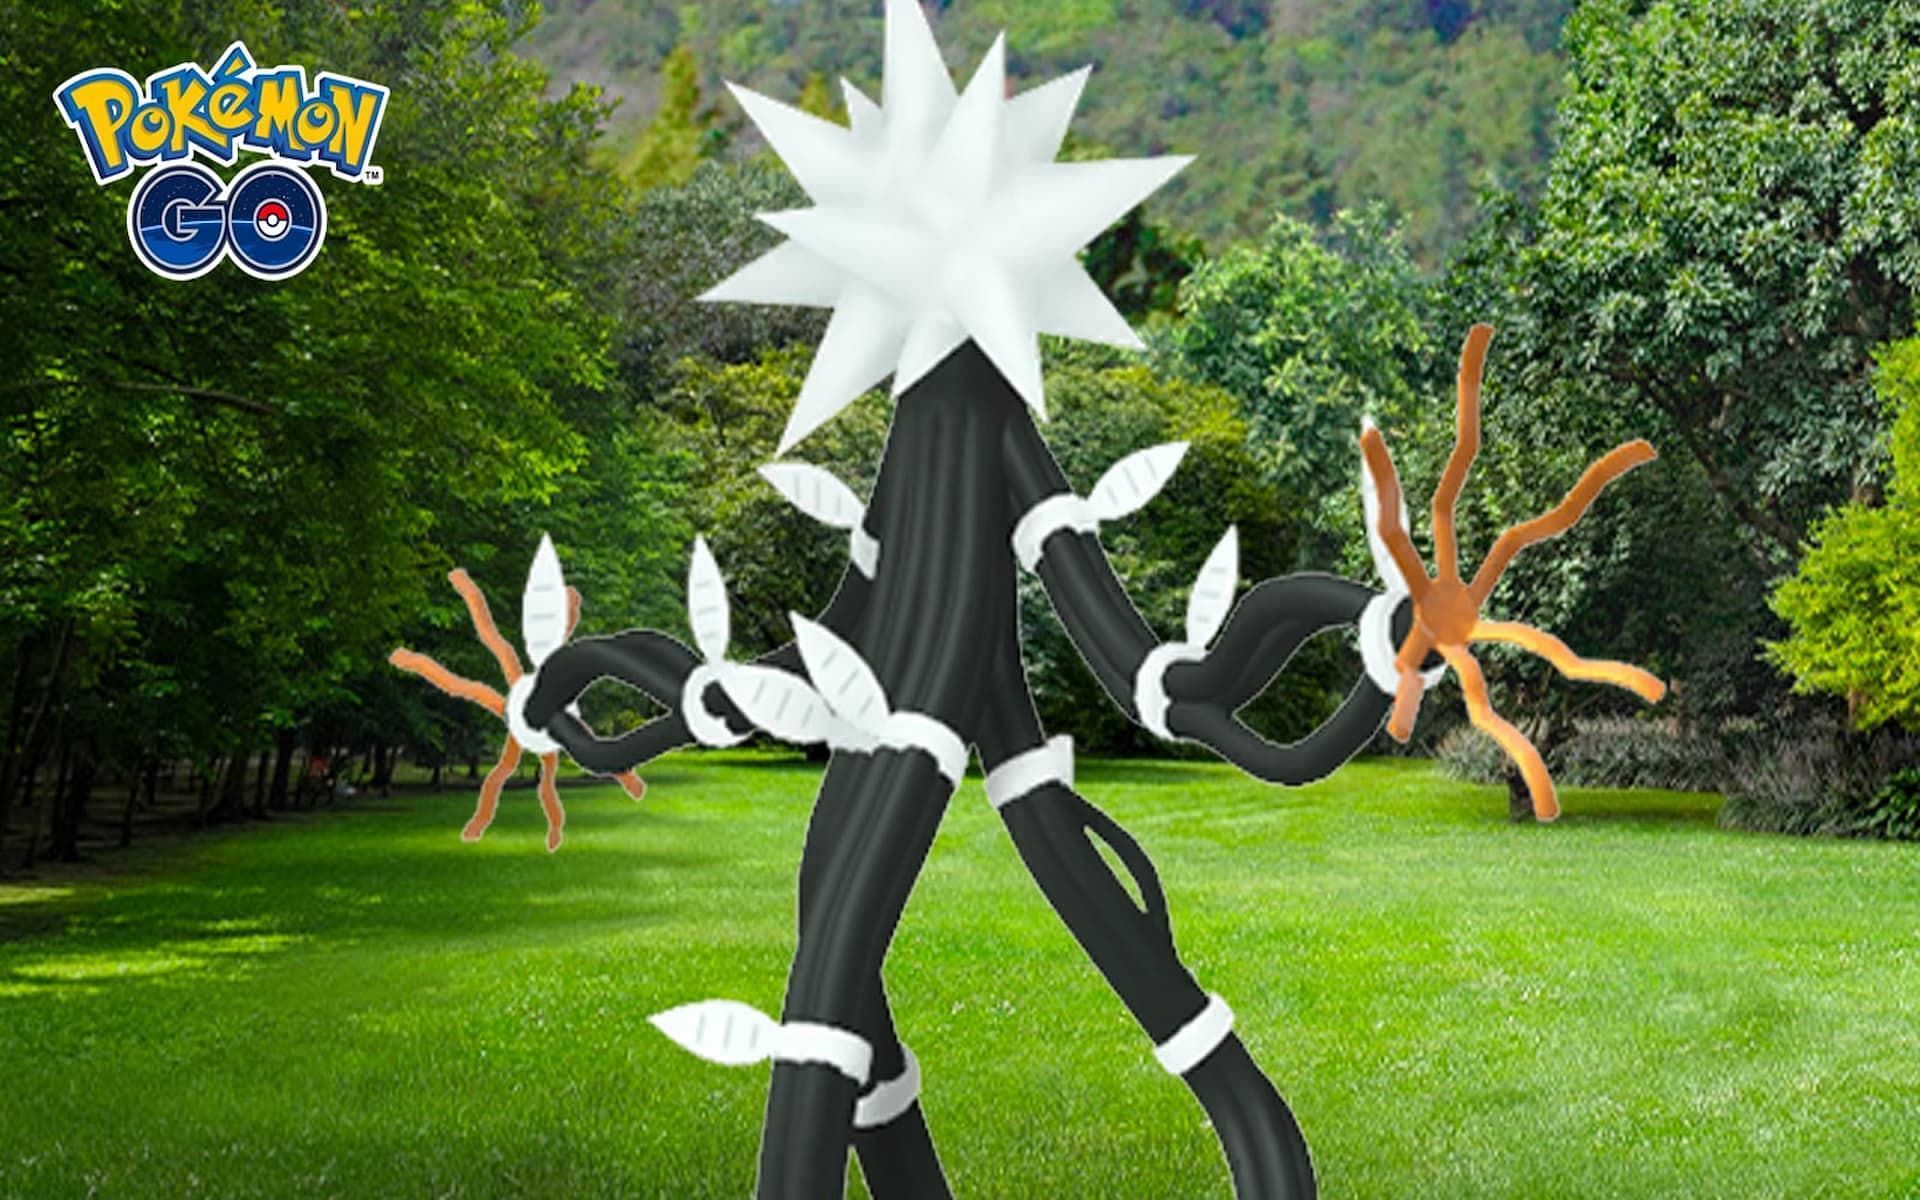 The Ultra Beasts are not invincible in Pokemon GO (Image via Niantic)